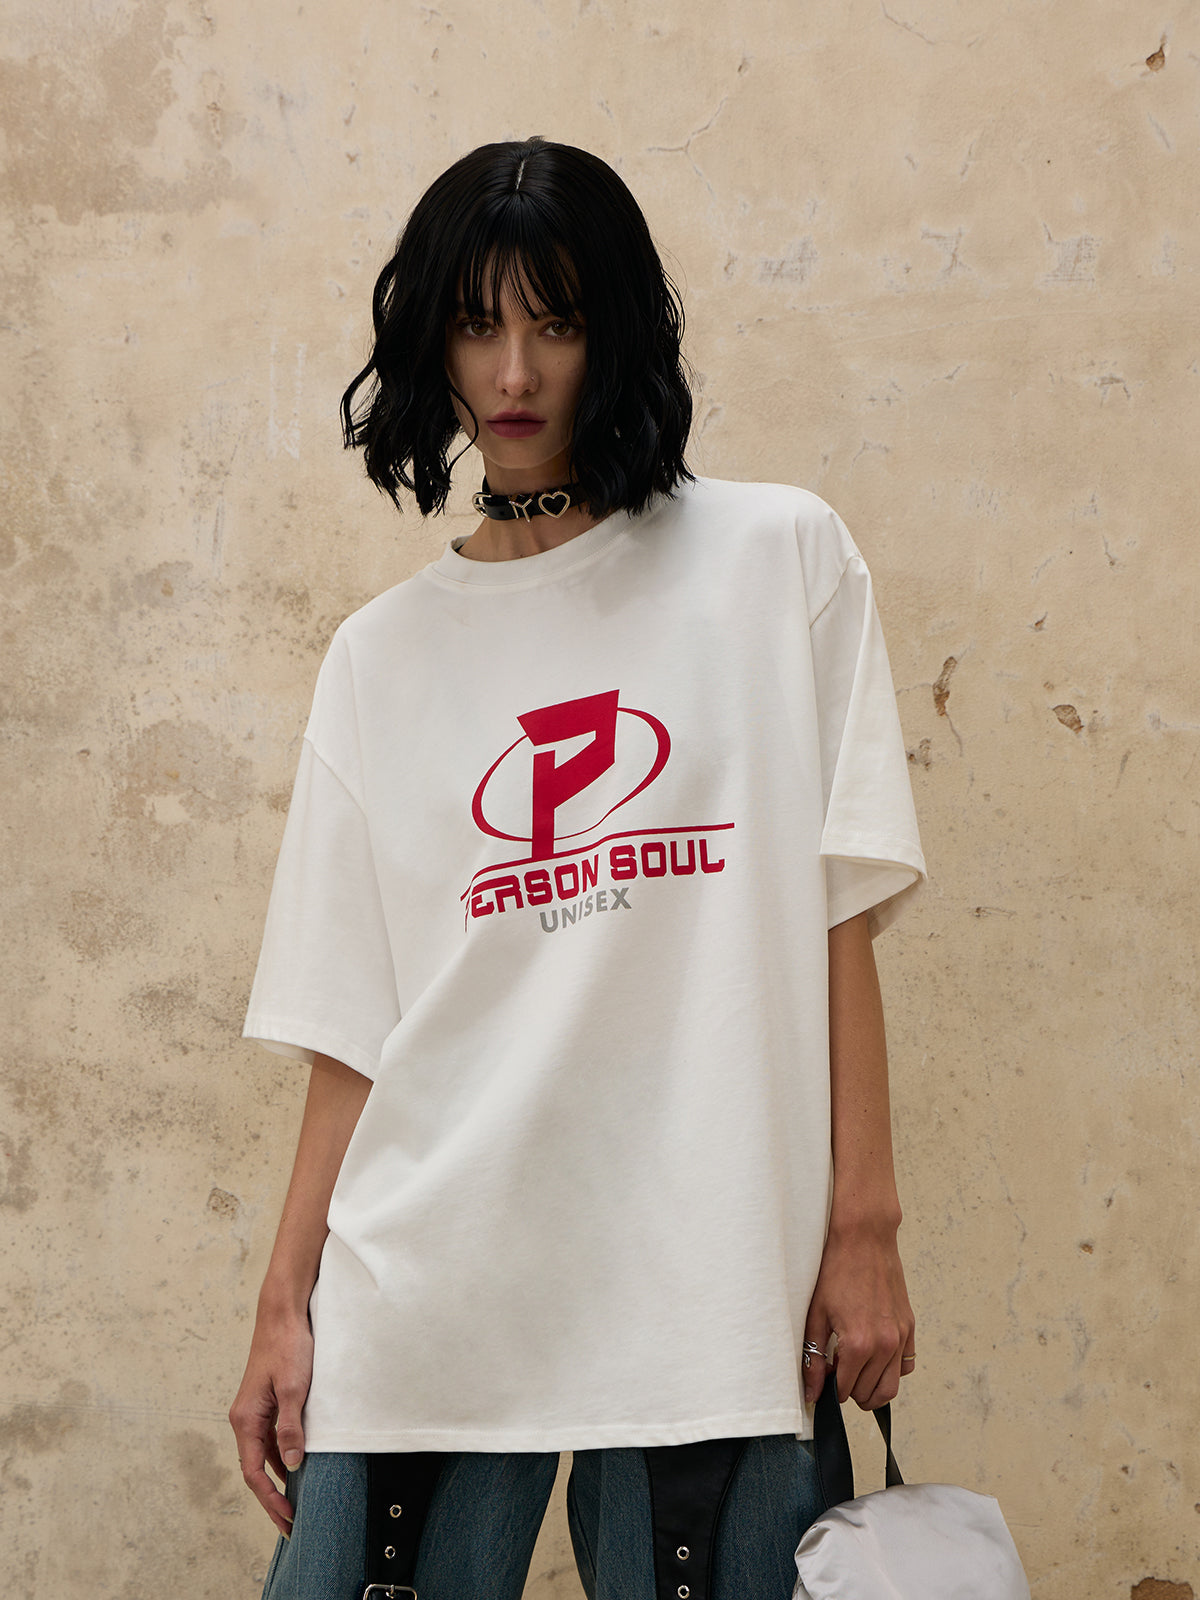 Personsoul Relaxed Logo Tee